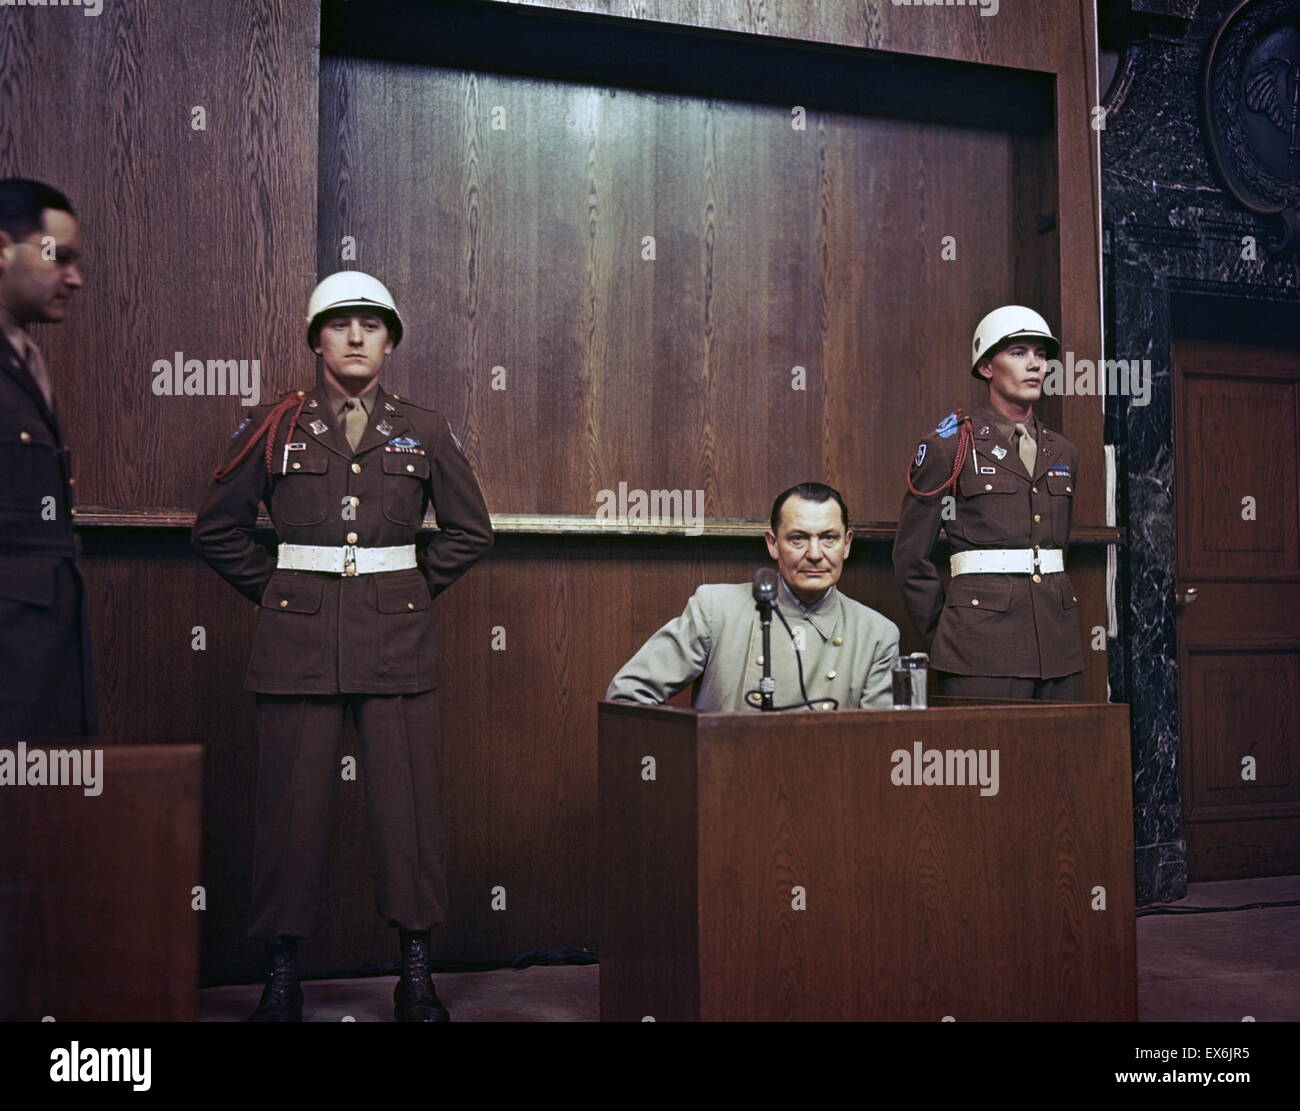 Hermann Wilhelm Goring ( 1893 – 15 October 1946) German politician, of the Nazi Party (NSDAP), on trial at the Nuremburg War Crimes Trials 1946 Stock Photo